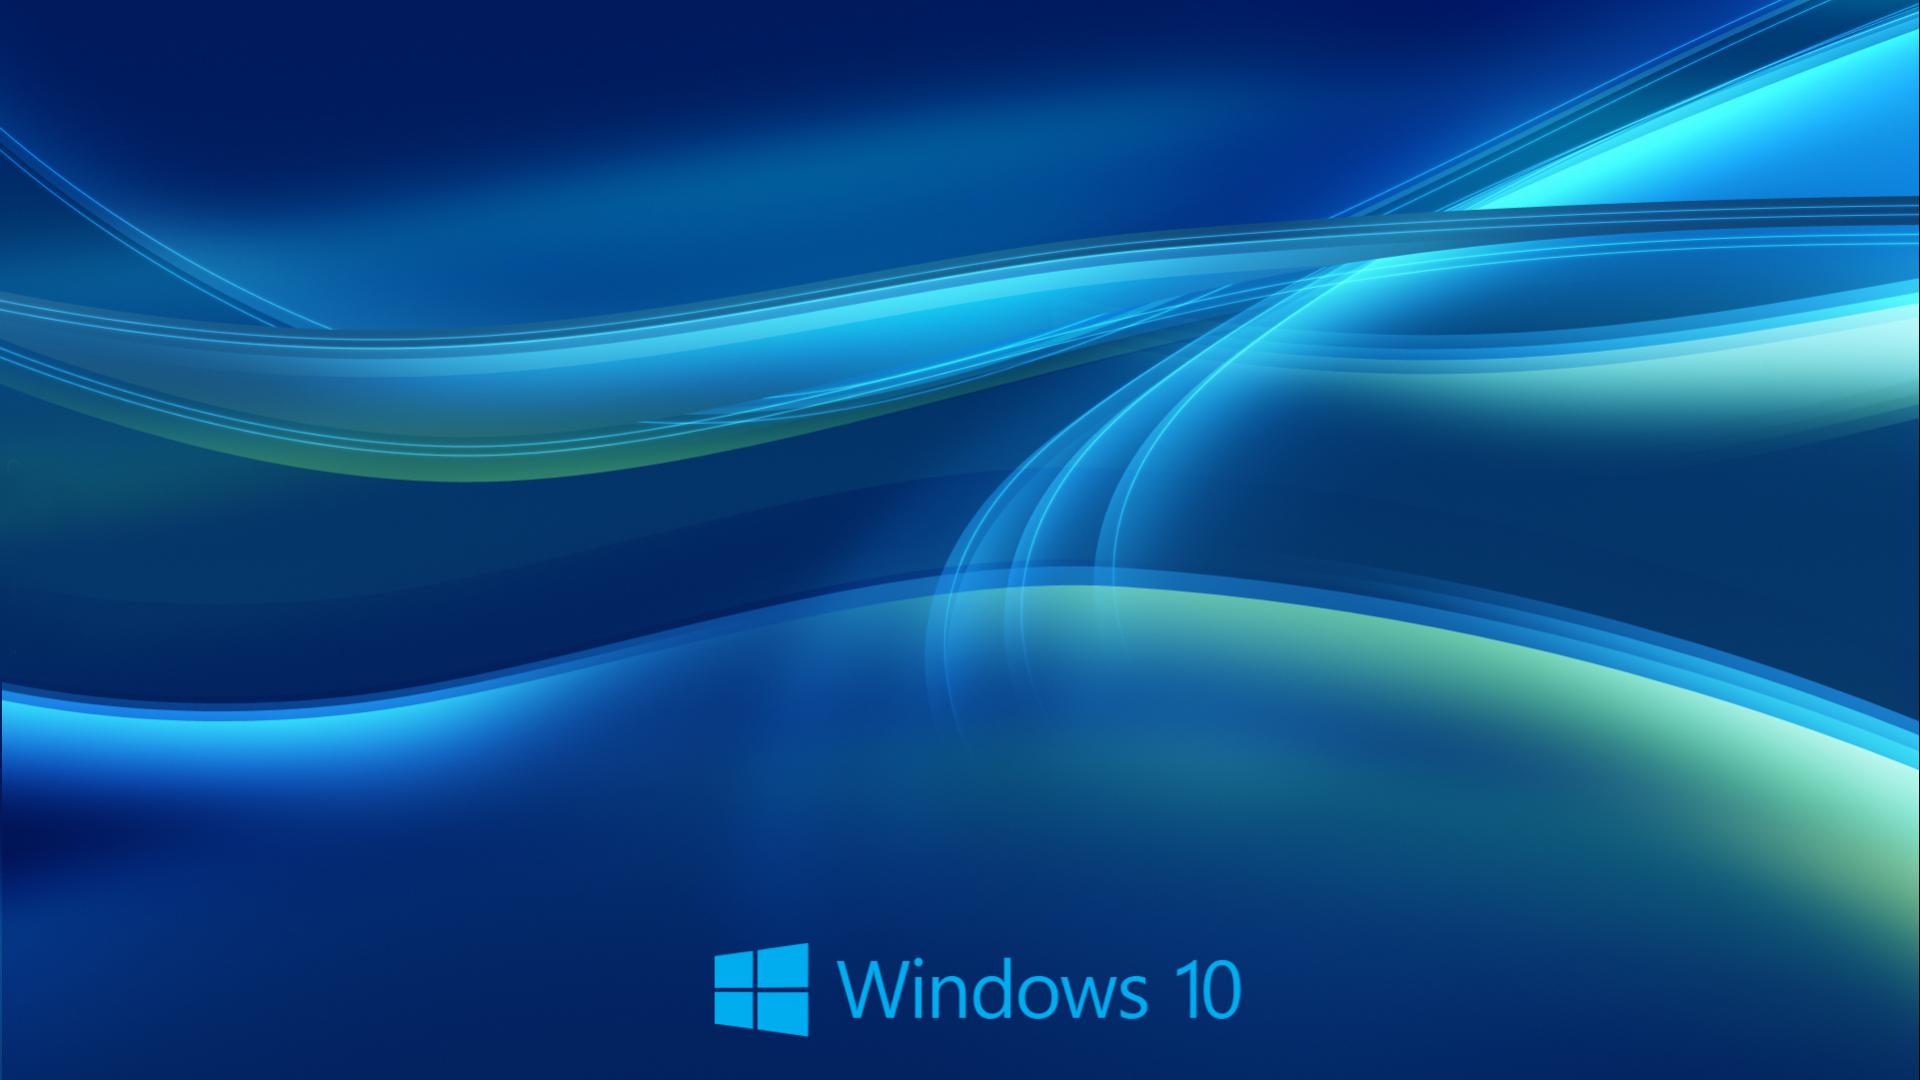 Windows 10 Wallpaper HD in Blue Abstract with New Logo HD Wallpapers 1920x1080